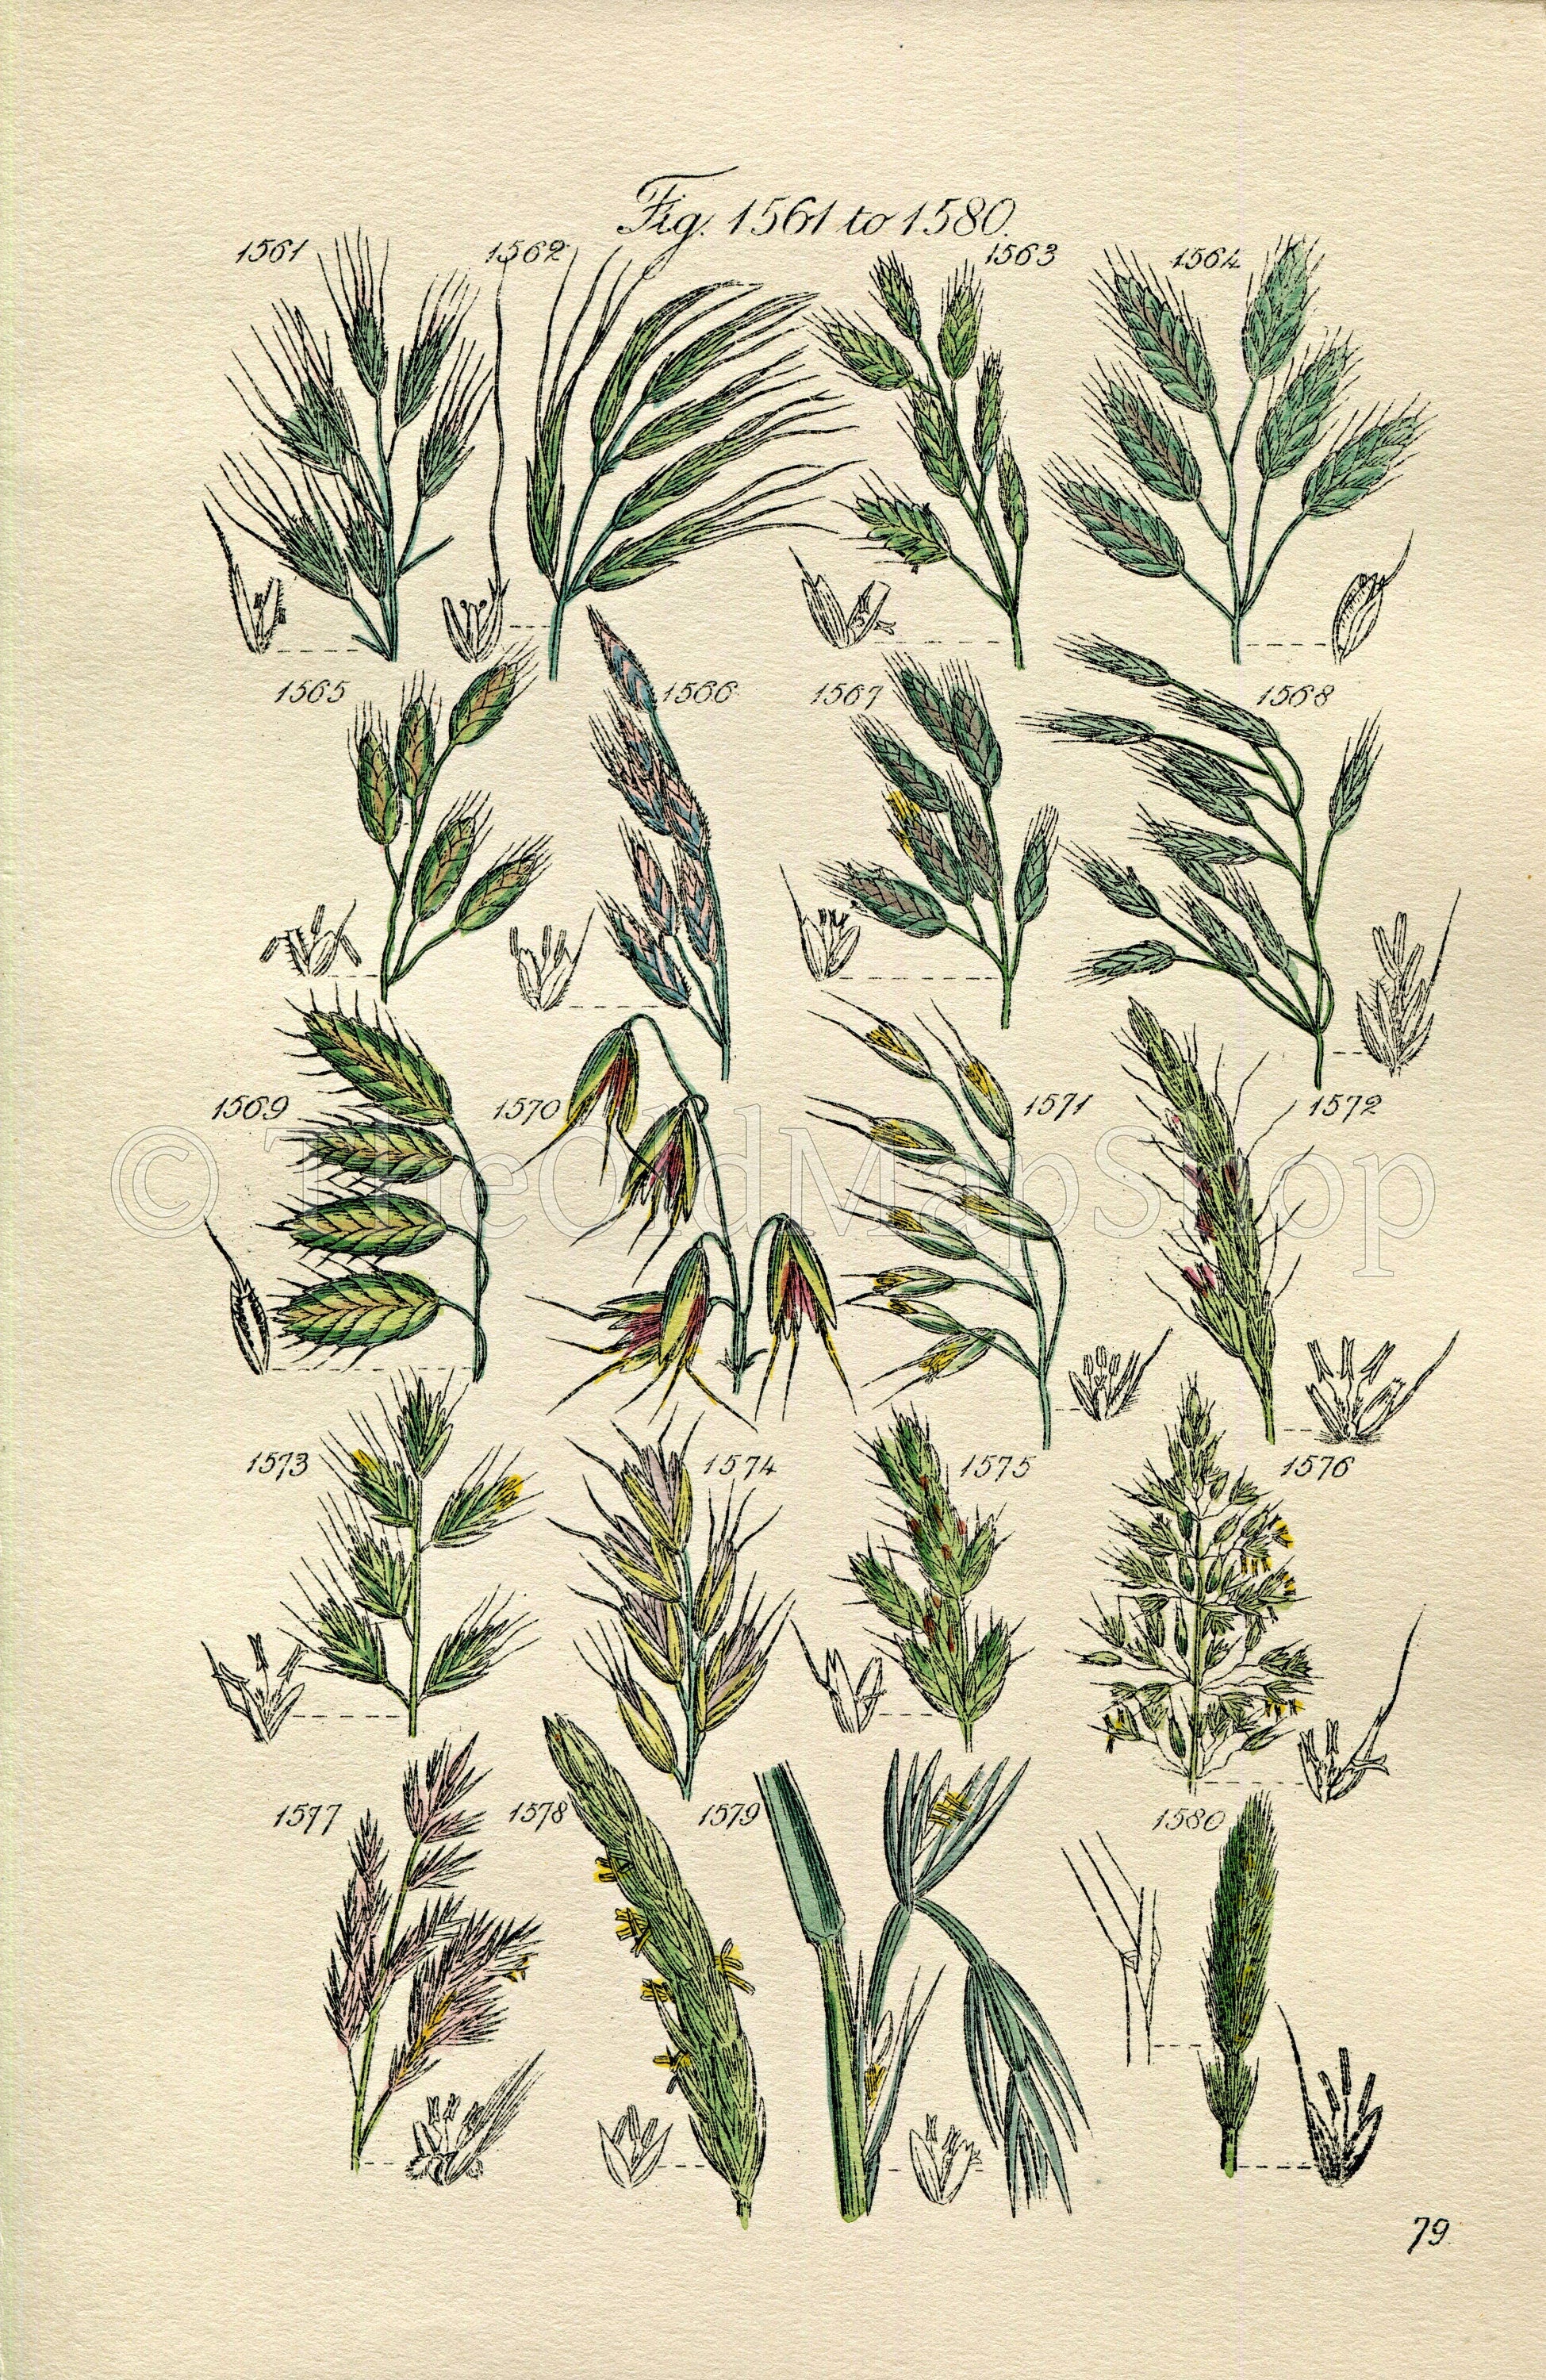 Soft and Upright Annual Brome-grass. Genuine antique print for sale.